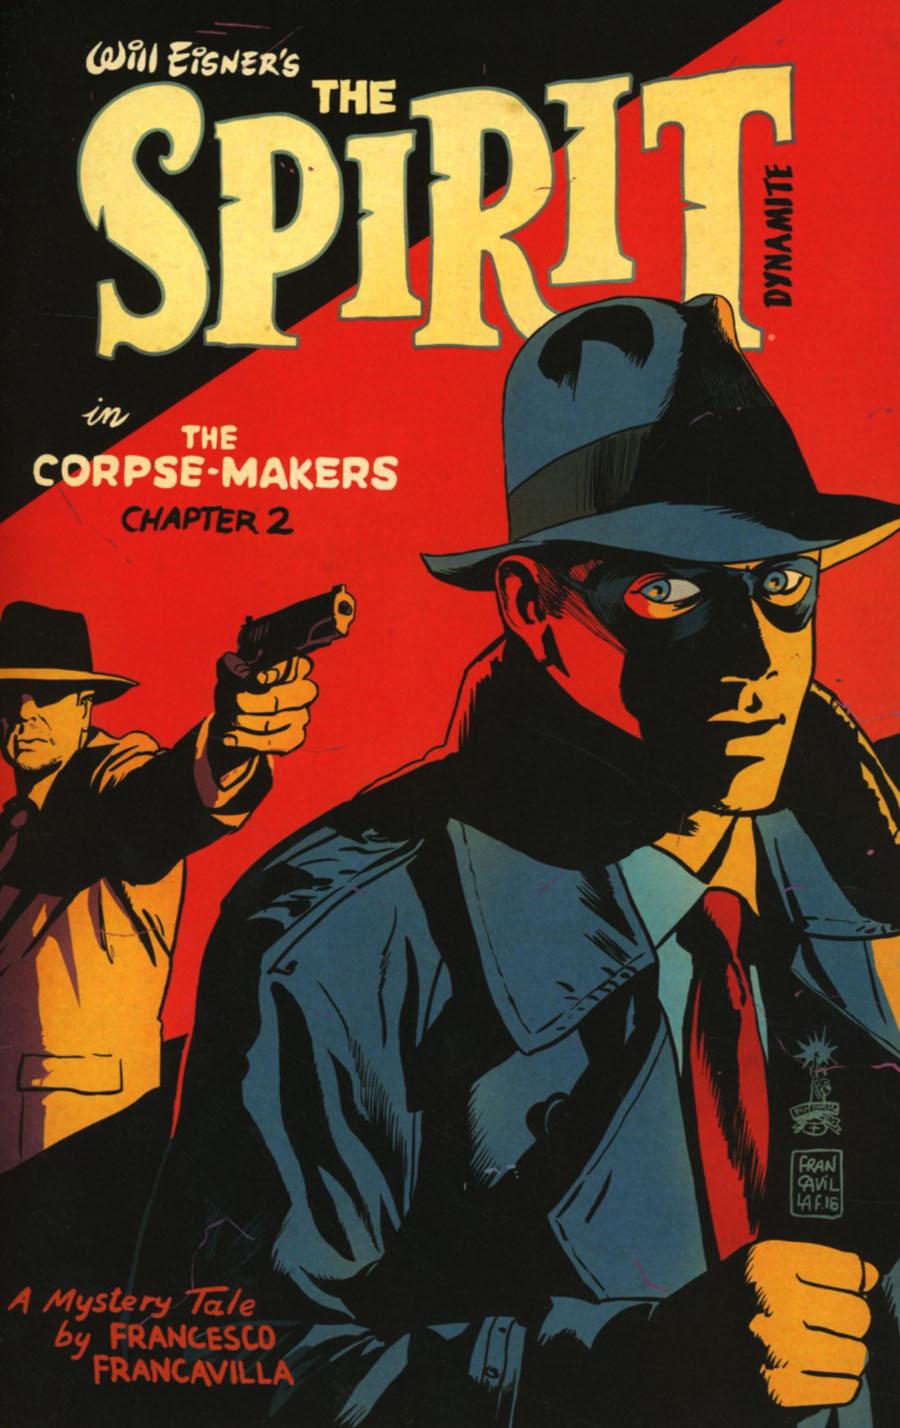 Will Eisners Spirit Corpse-Makers Vol. 1 #2